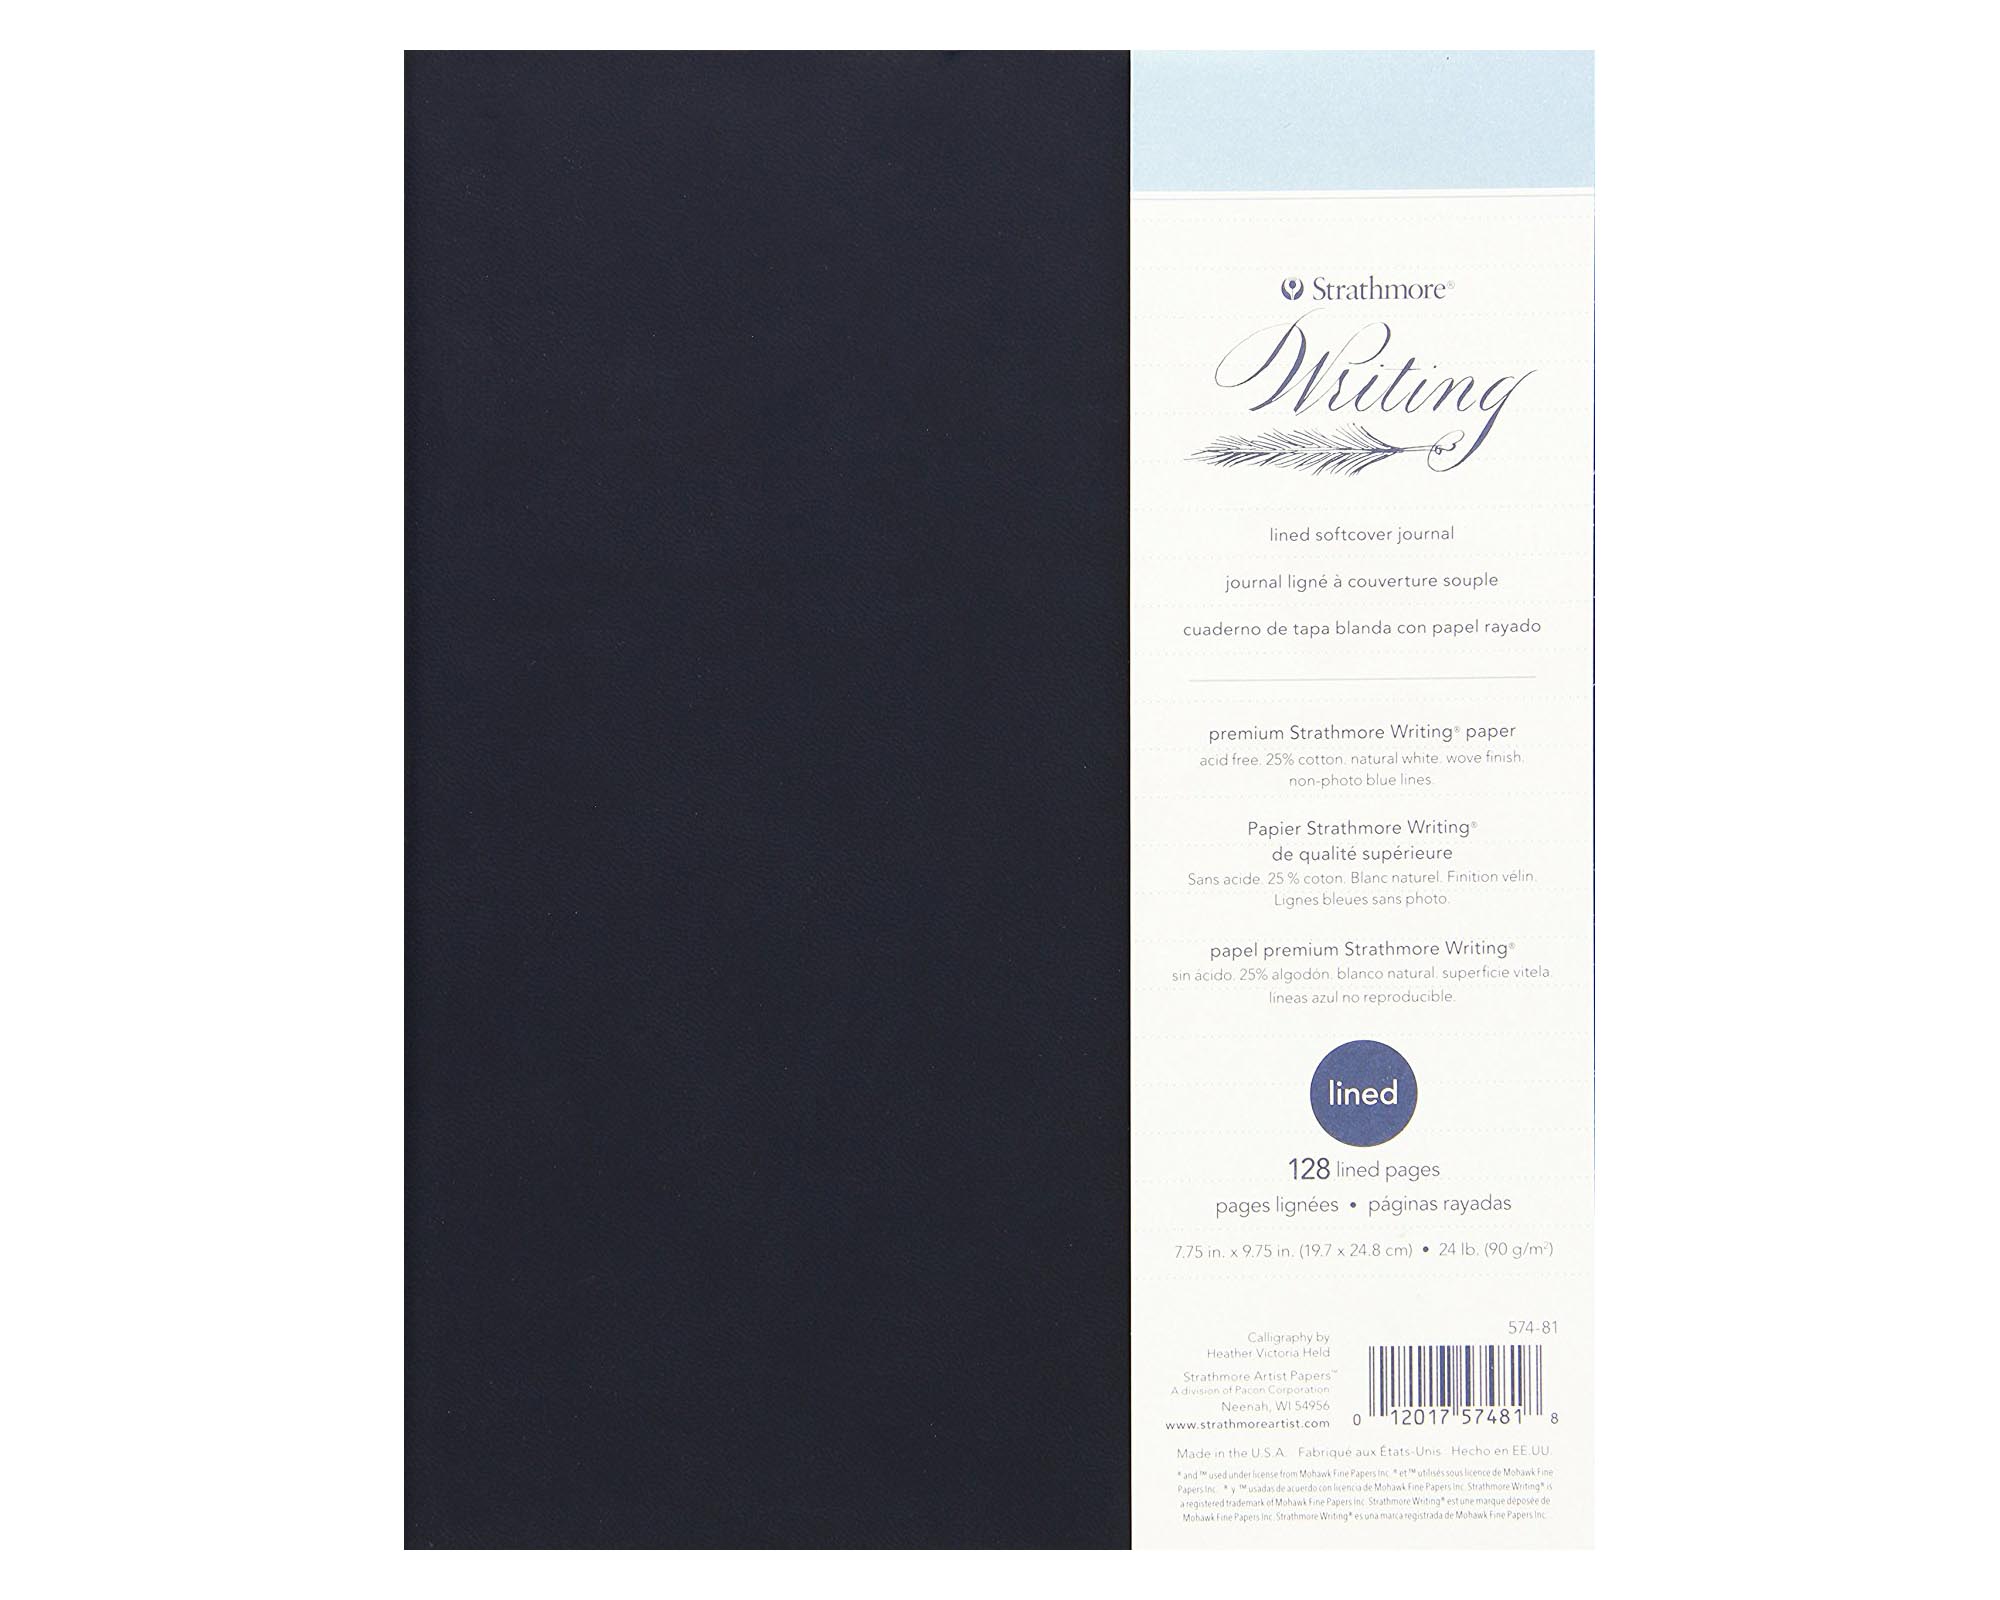 Strathmore 500 Series Softcover Writing Journal 5.5" x 8" Lined